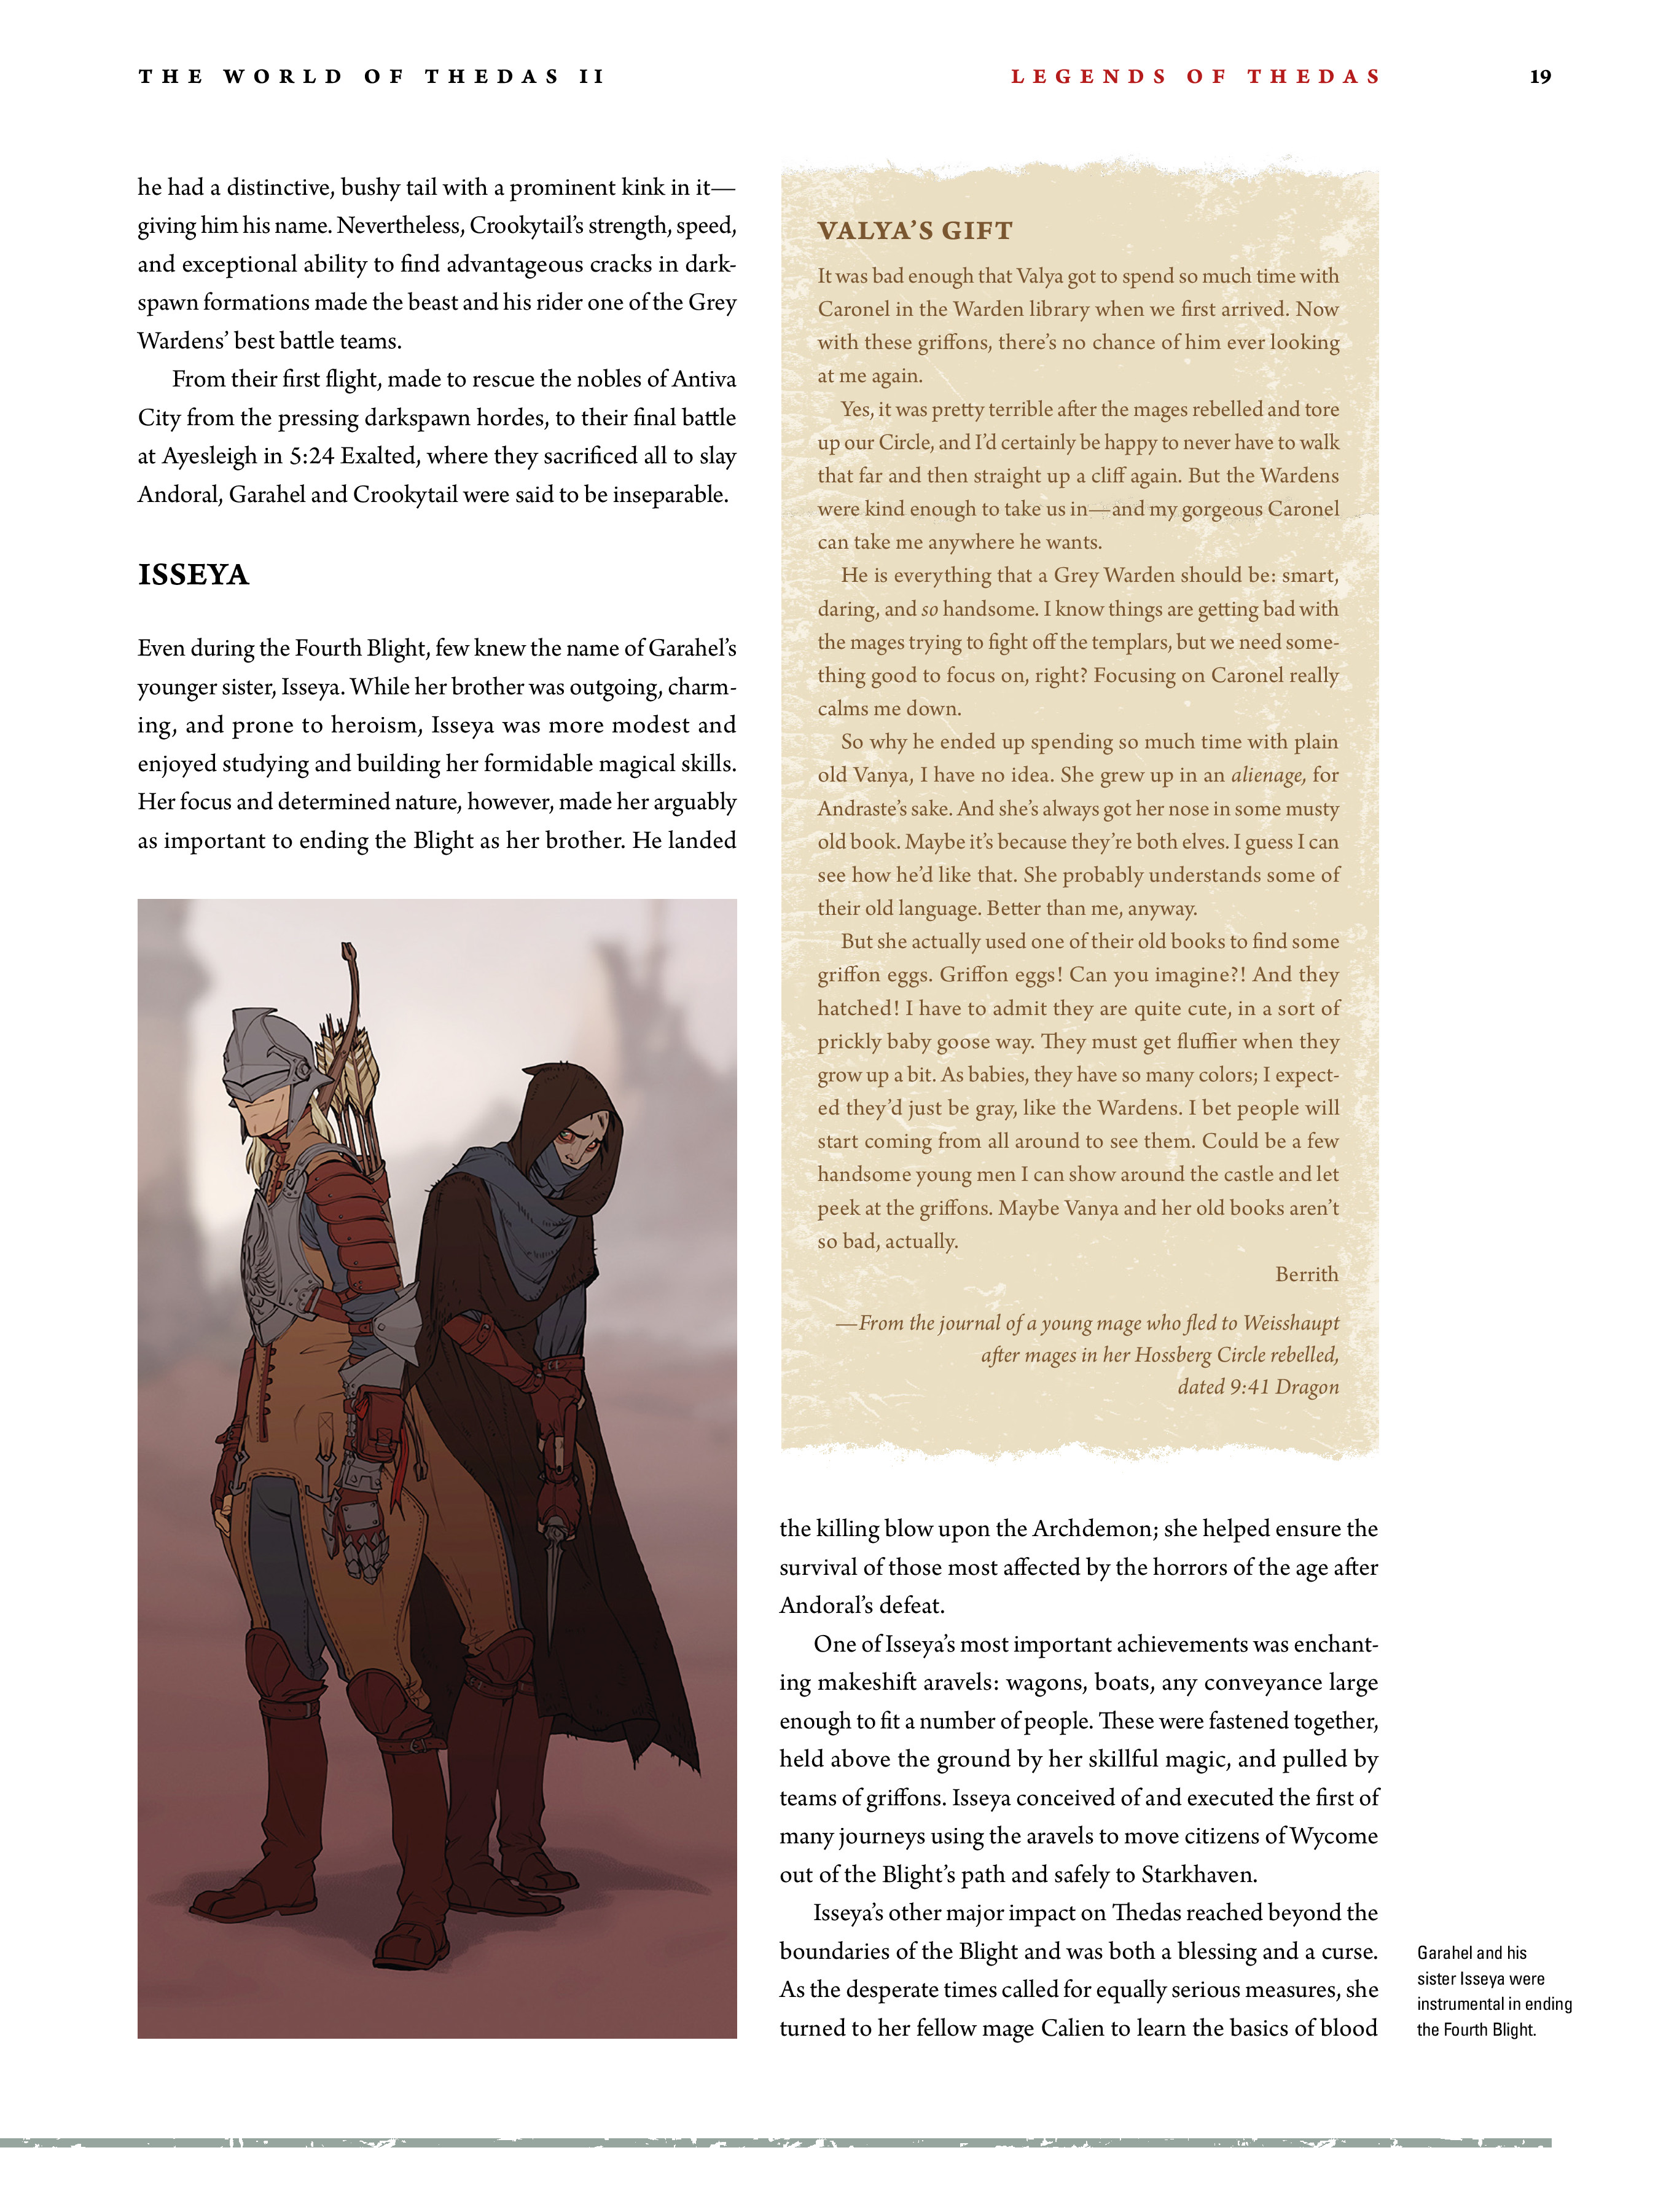 Read online Dragon Age: The World of Thedas comic -  Issue # TPB 2 - 17